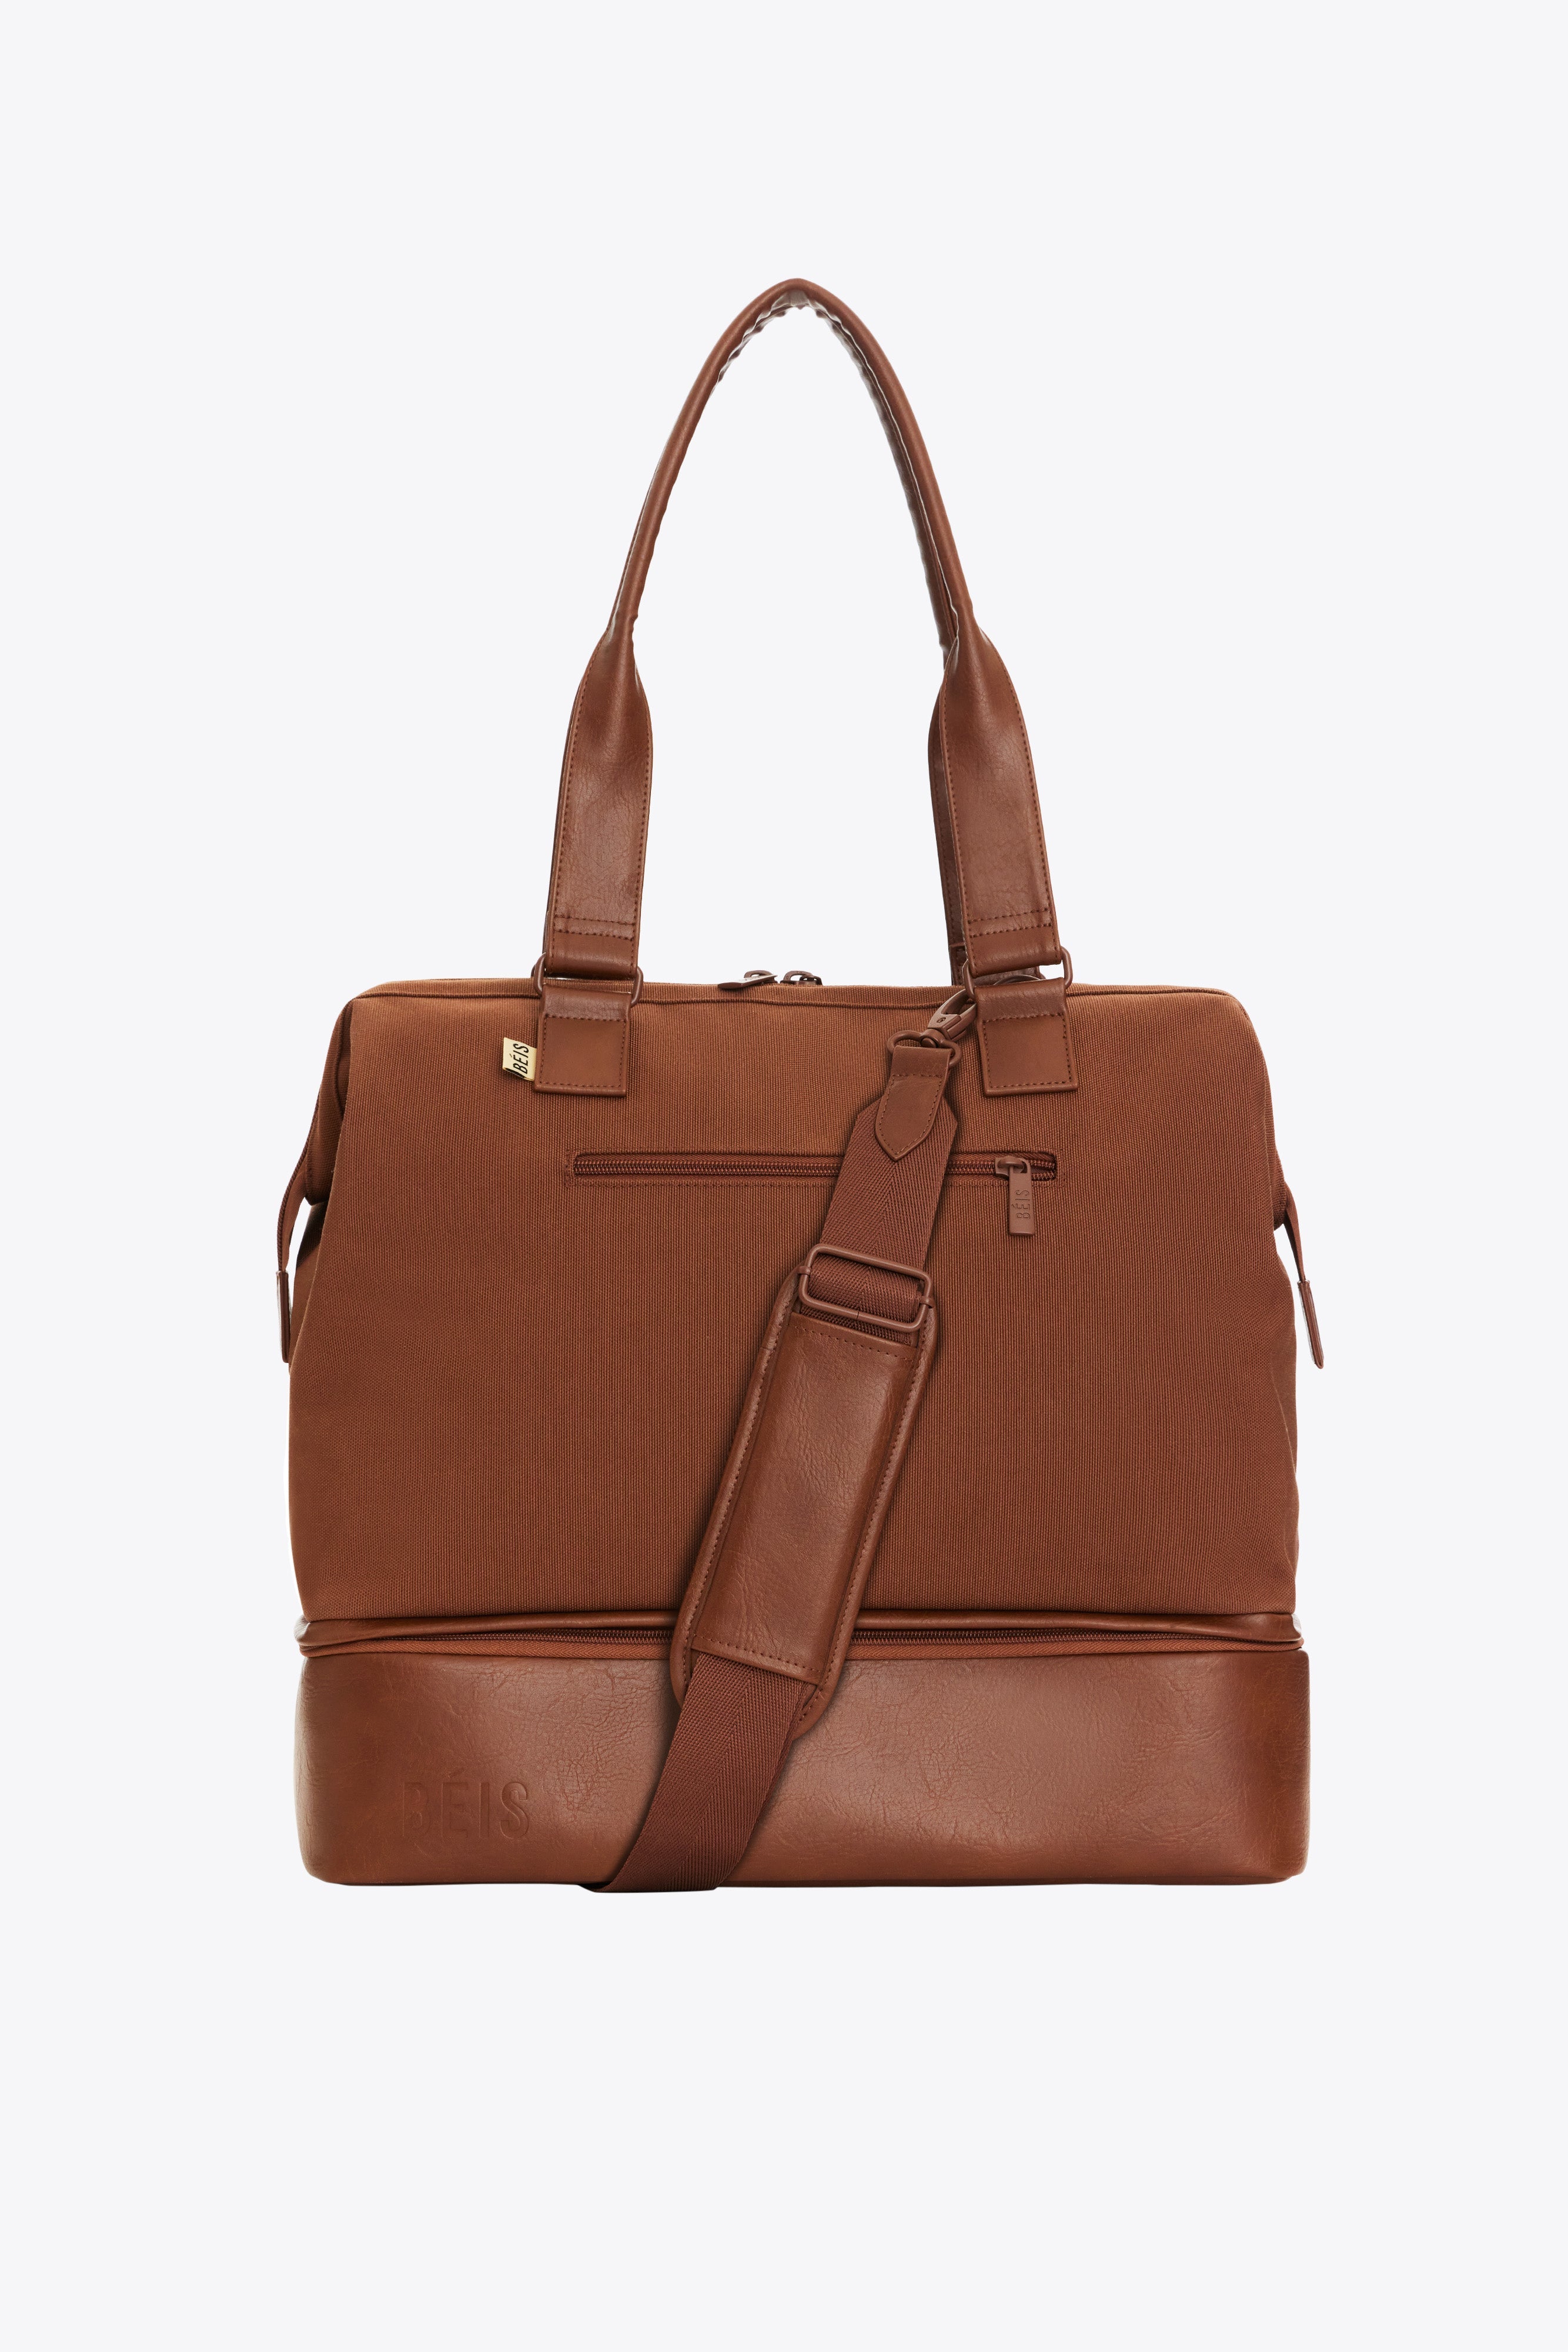 Béis 'The Convertible Mini Weekender' in Maple - Small Overnight Bag & Brown Duffle Bag